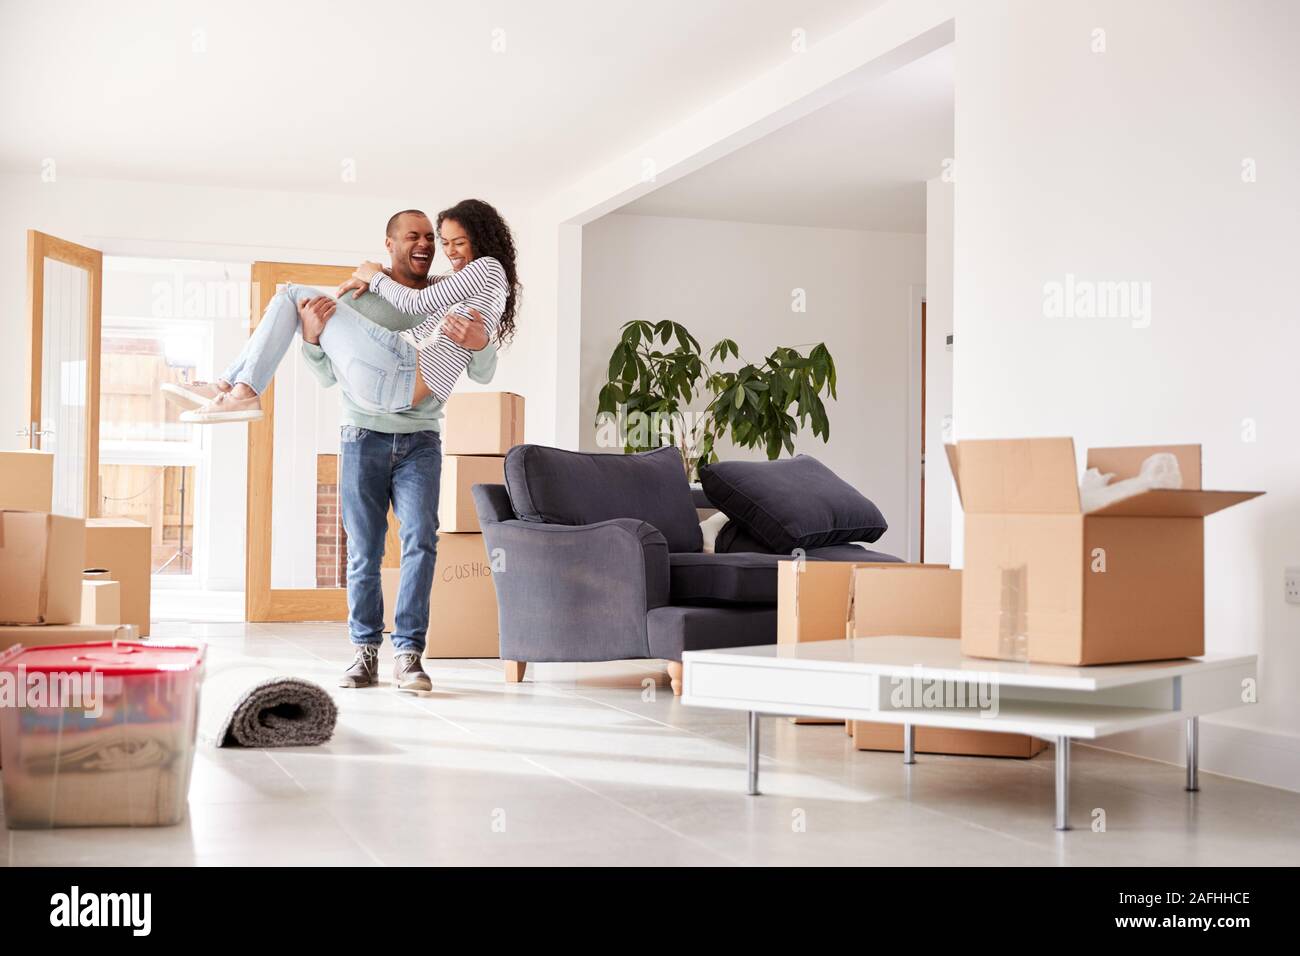 Man Carrying Woman Over Threshold Of New Home On Moving Day Stock Photo